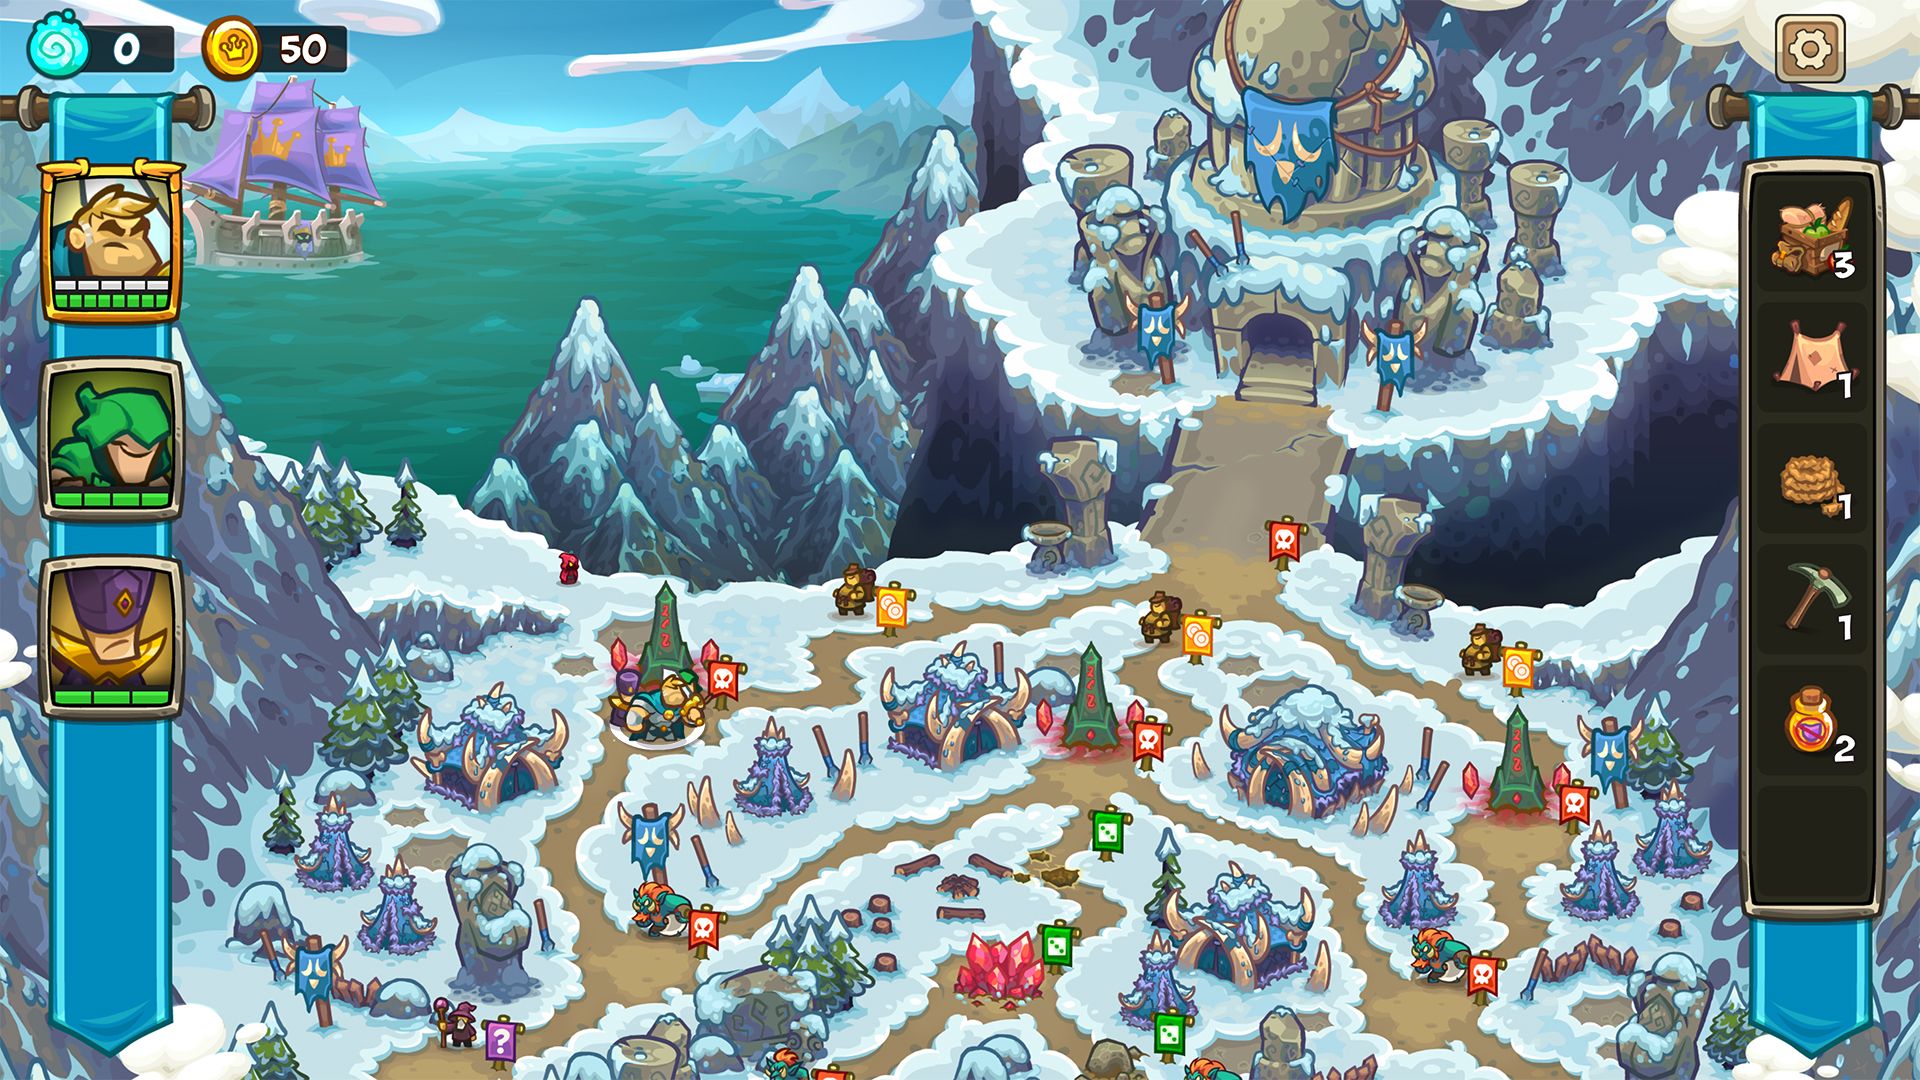 In-game screenshot of a frozen world map on a mountain leading to a large stone temple.